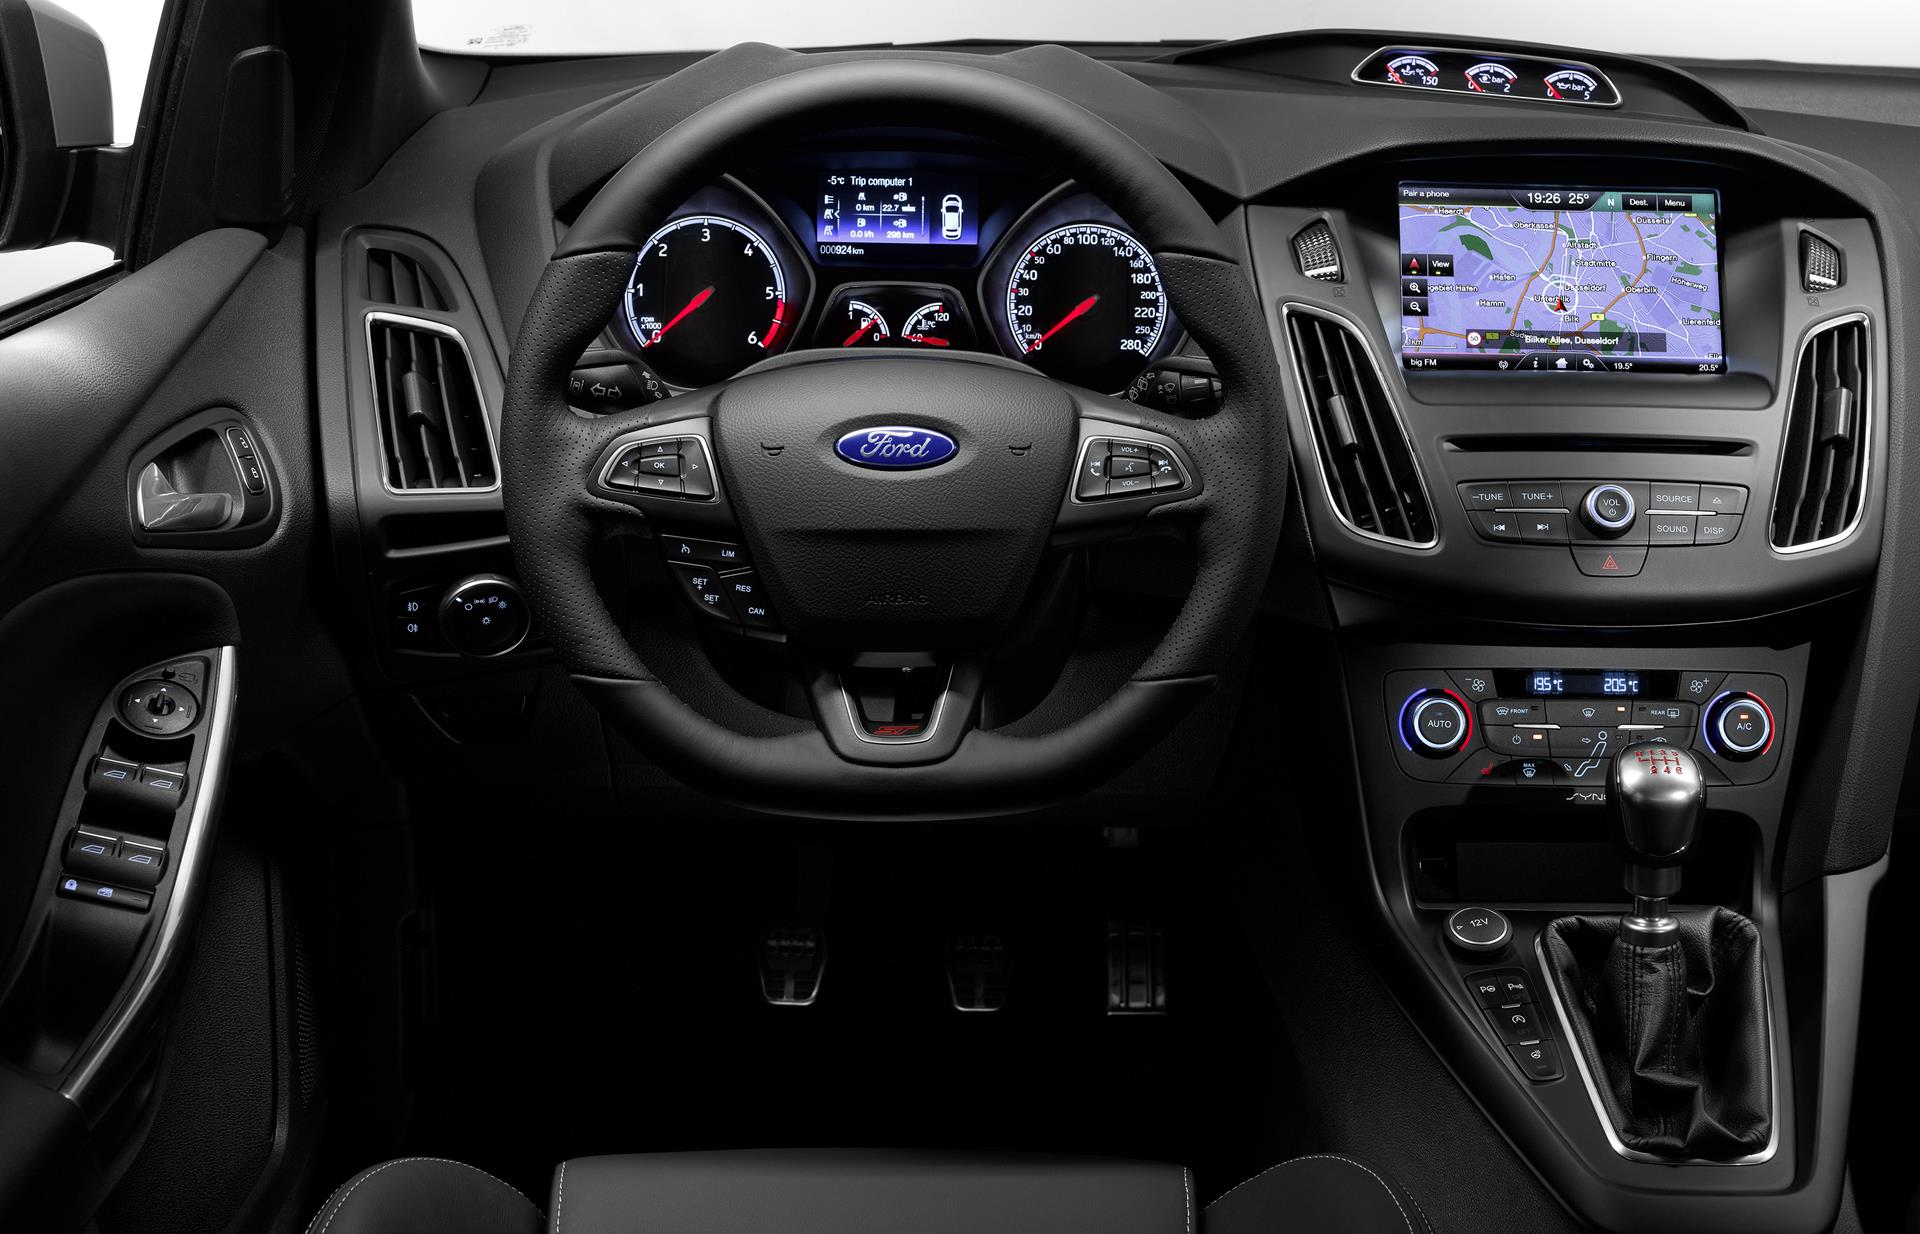 2015 Ford Focus St Wallpapers - 2015 Ford Focus - HD Wallpaper 